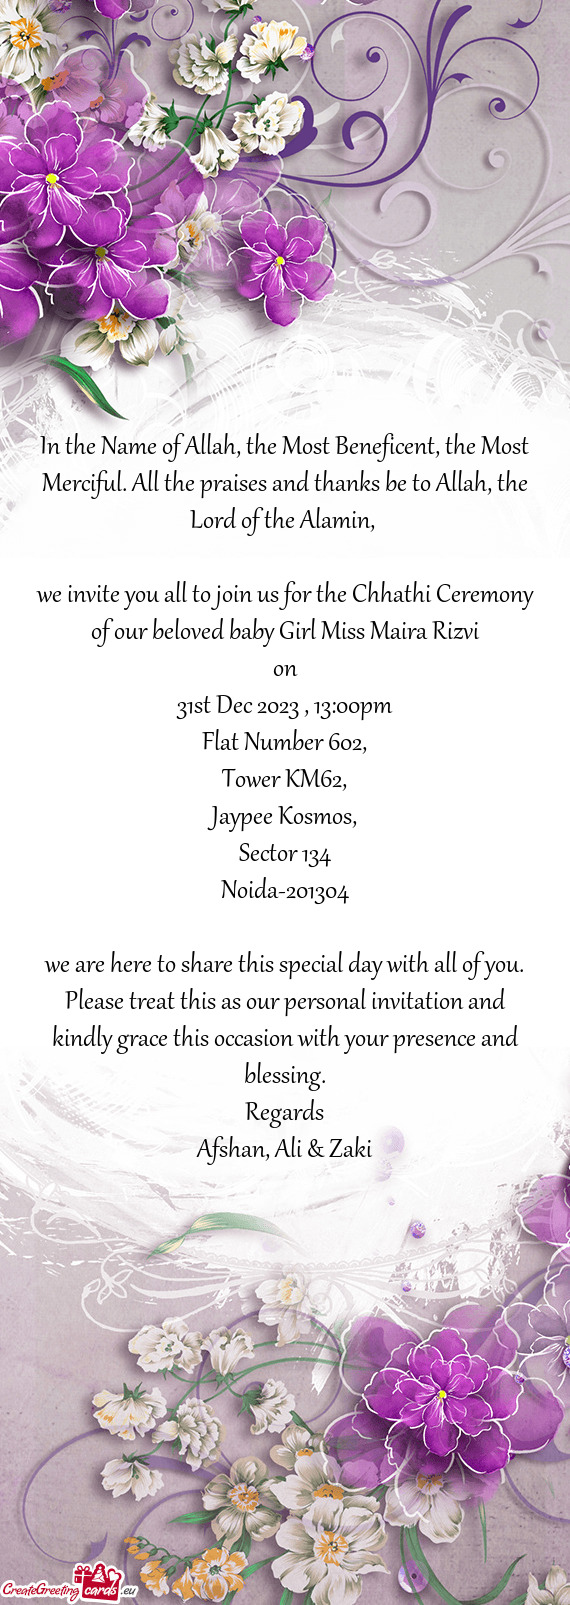 We invite you all to join us for the Chhathi Ceremony of our beloved baby Girl Miss Maira Rizvi